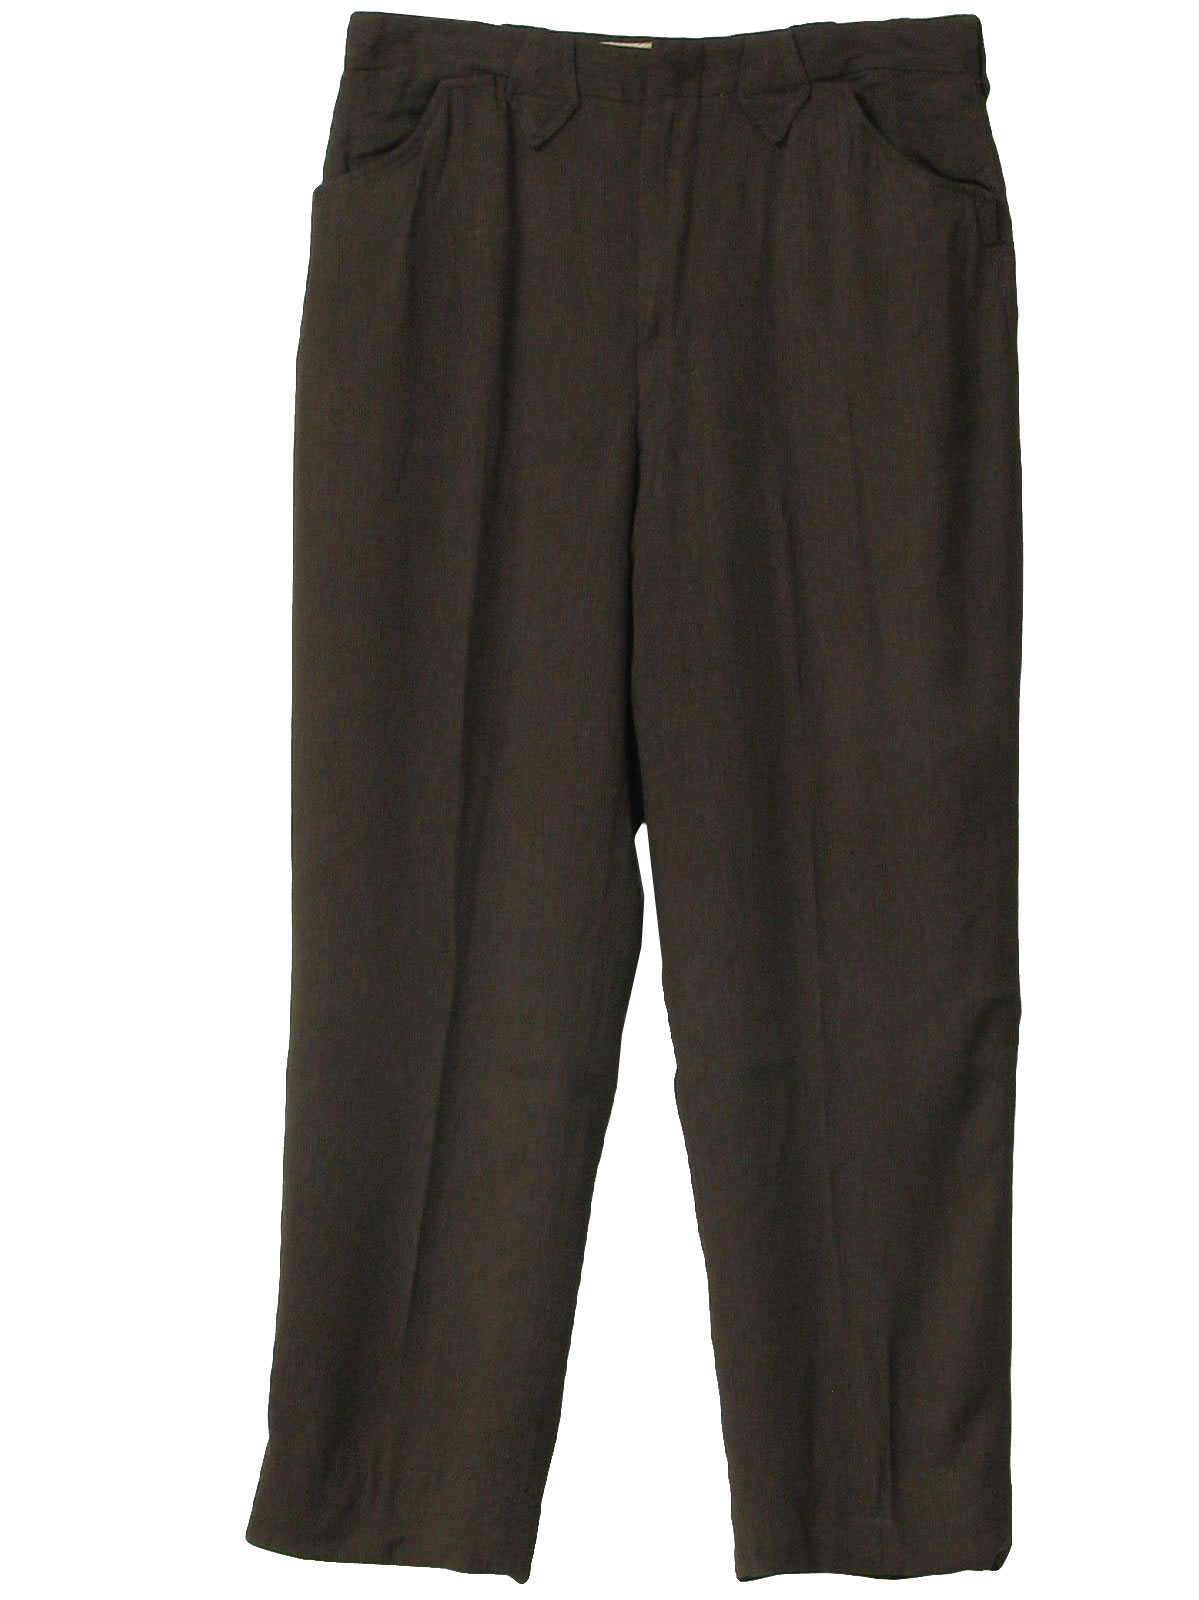 50s Retro Pants: 50s -No Label- Mens dark brown with faint bronze and ...